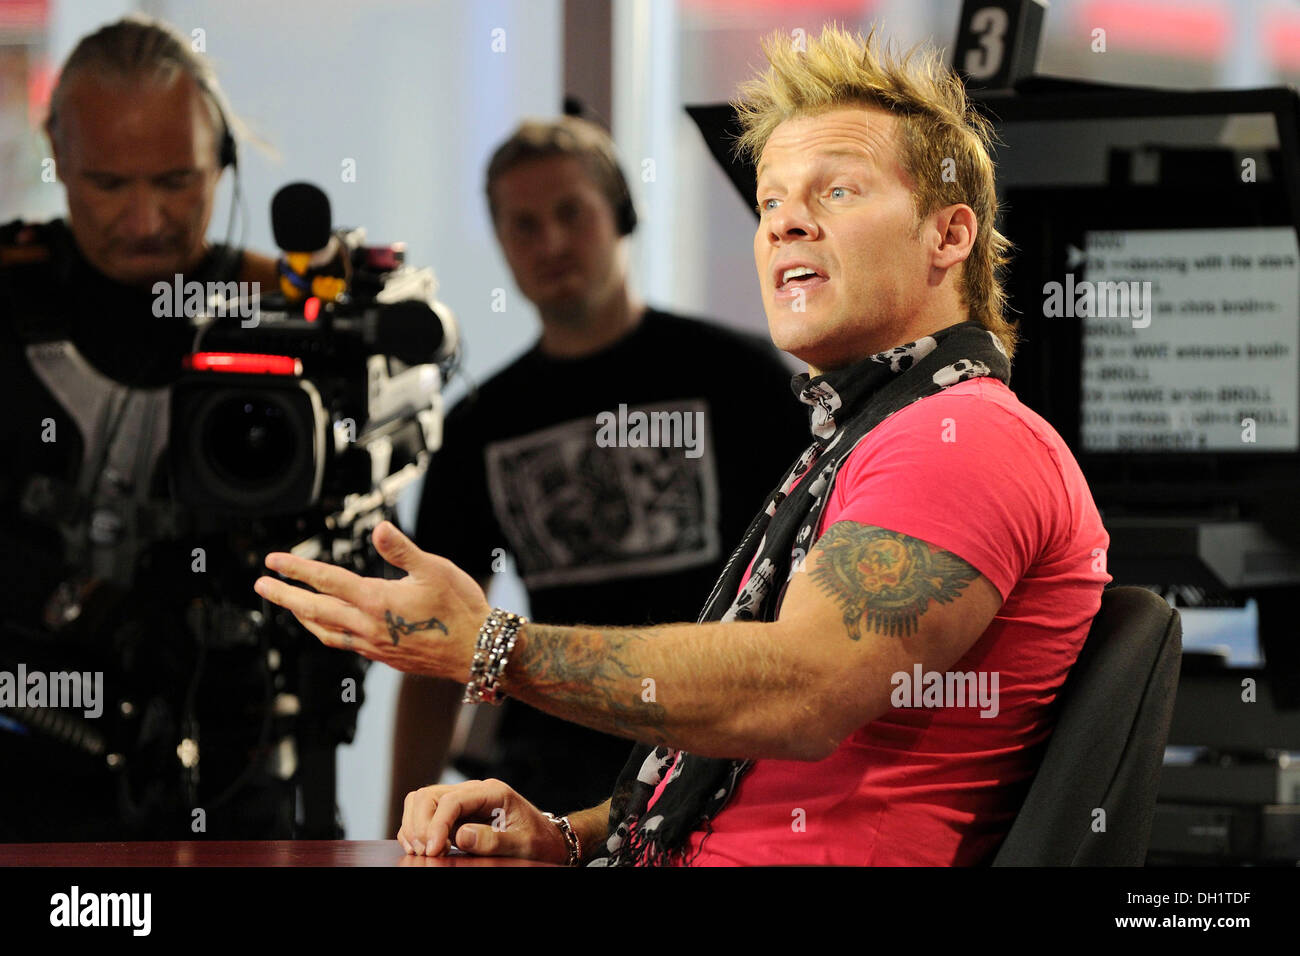 Toronto, Canada. 29th Oct 2013. Six times WWE (World Wrestling Entertainment) Champion, Chris Jericho appears on Global TV's THE MORNING SHOW sharing his experience professional wrestling career, his roles on television and his new web series But I’m Chris Jericho. Credit:  EXImages/Alamy Live News Stock Photo